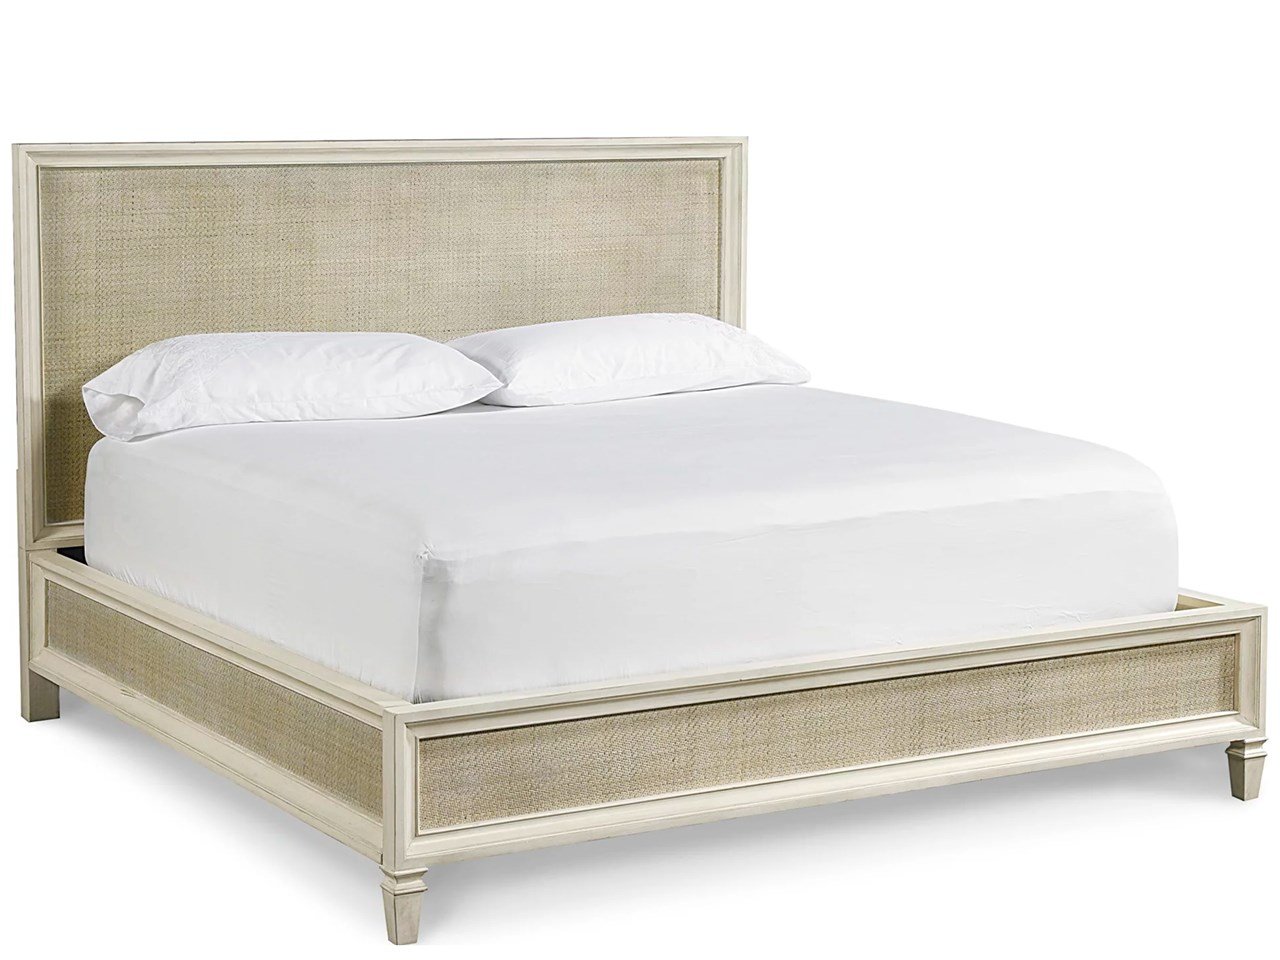 Woven Accent King Bed